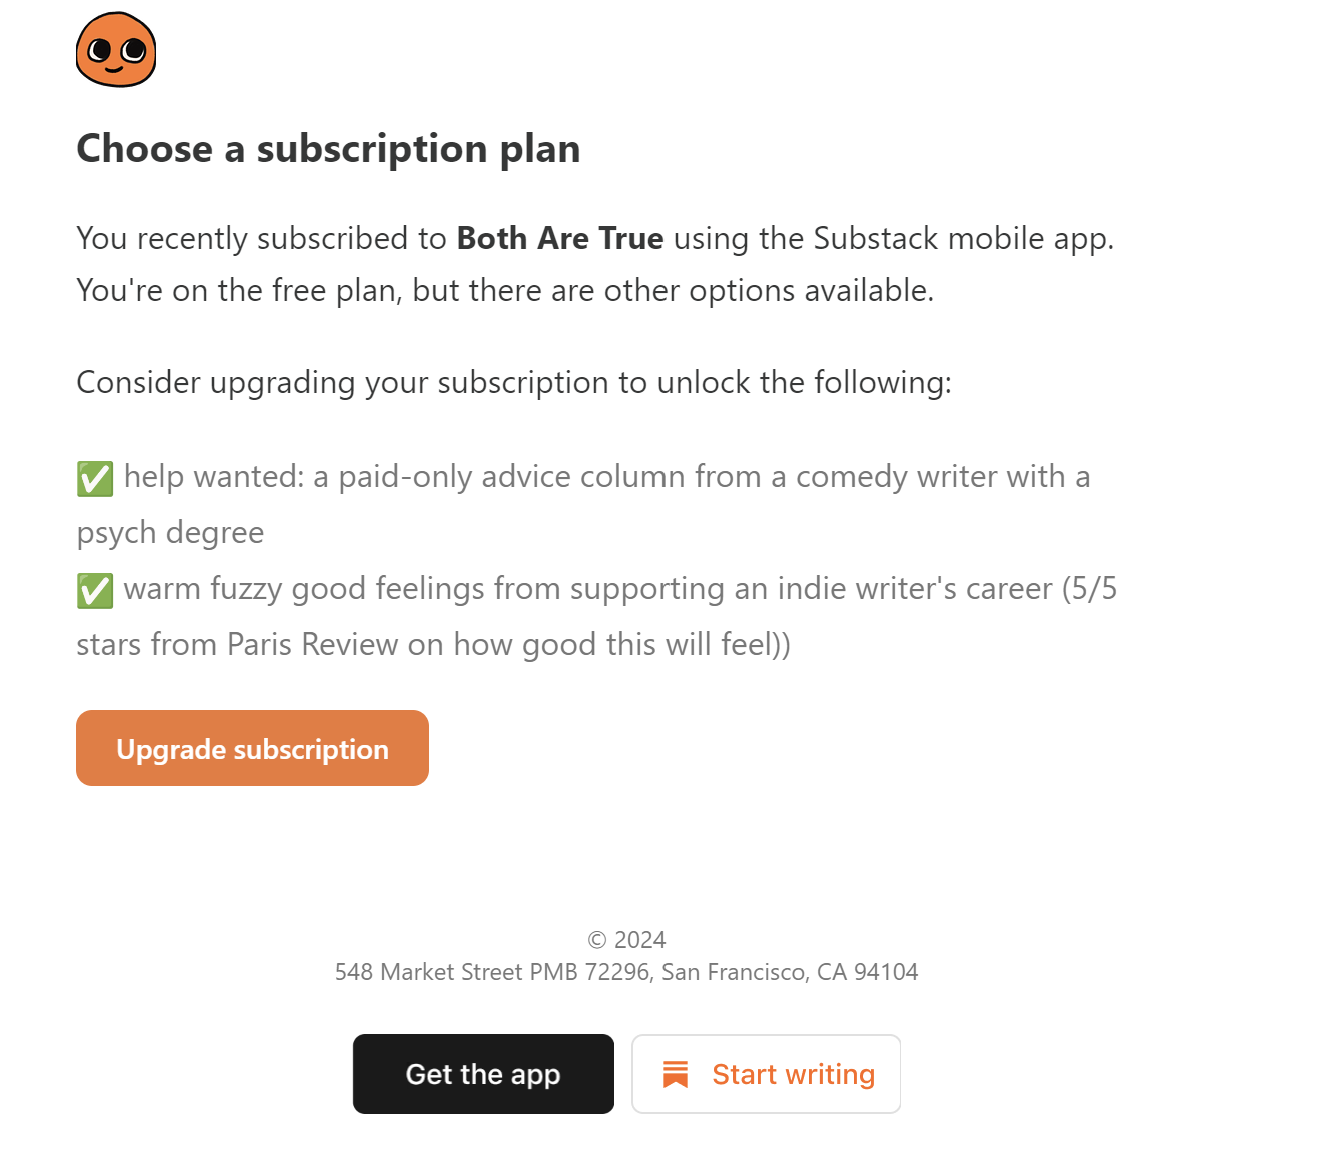 Subscription confirmation email example from Substack